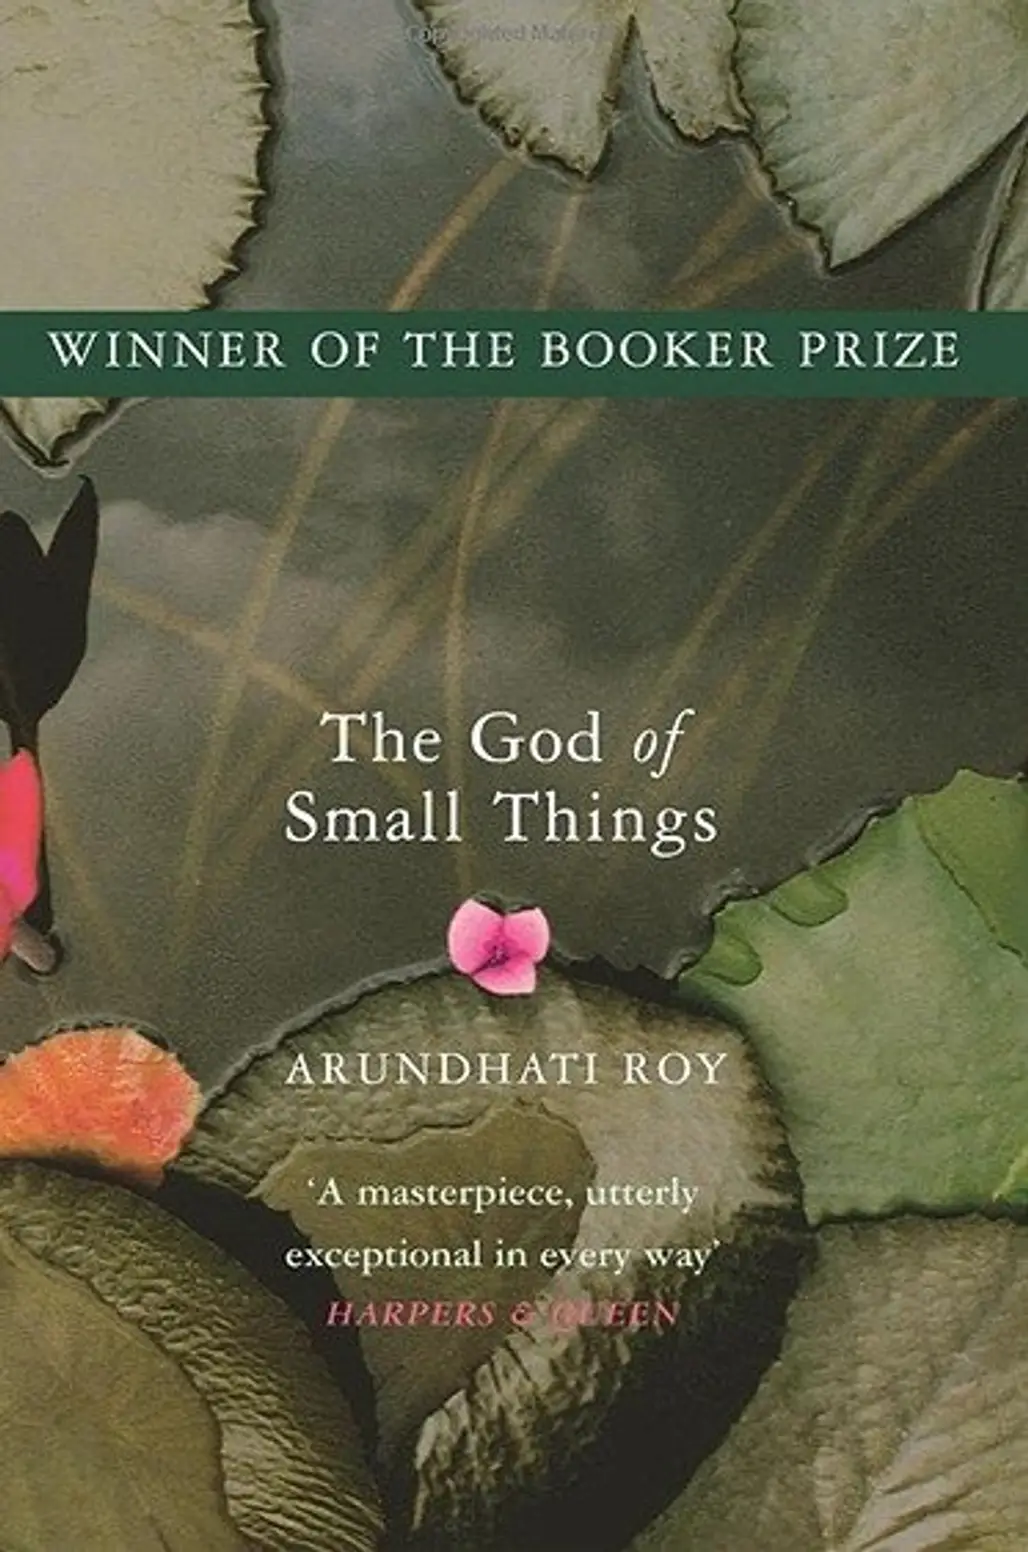 The God of Small Things – Arundhati Roy